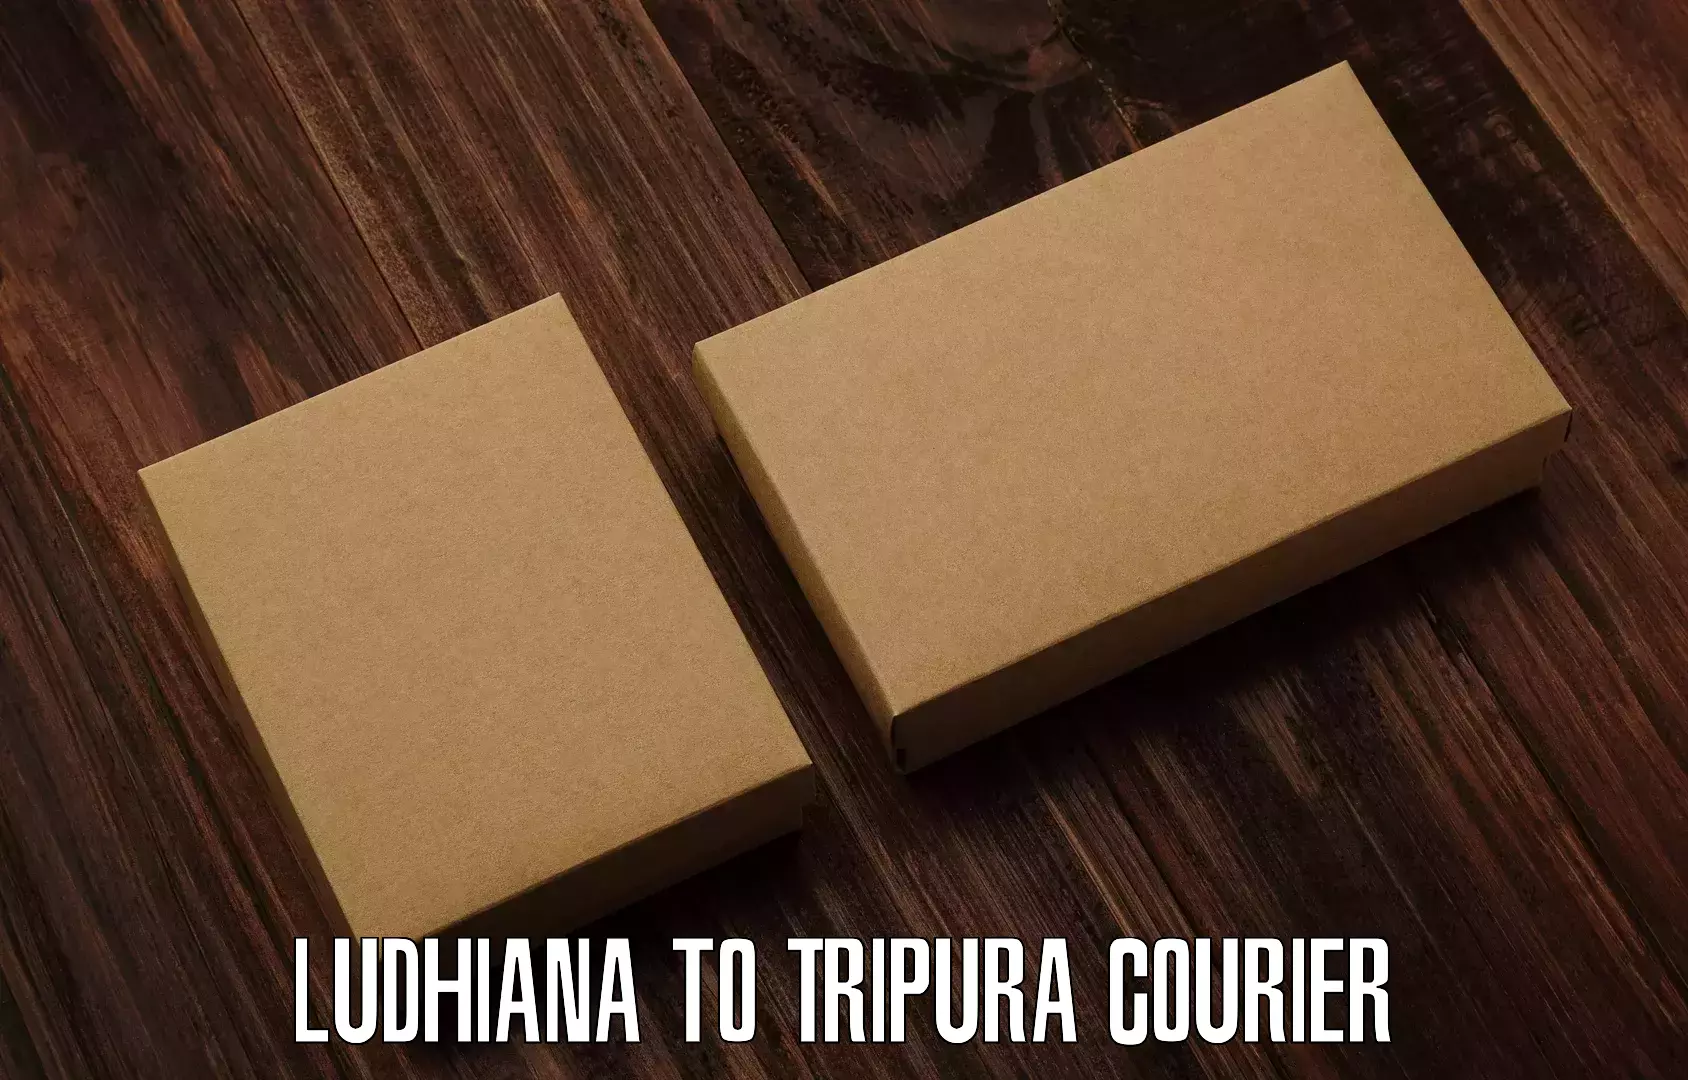 Express delivery capabilities Ludhiana to Udaipur Tripura